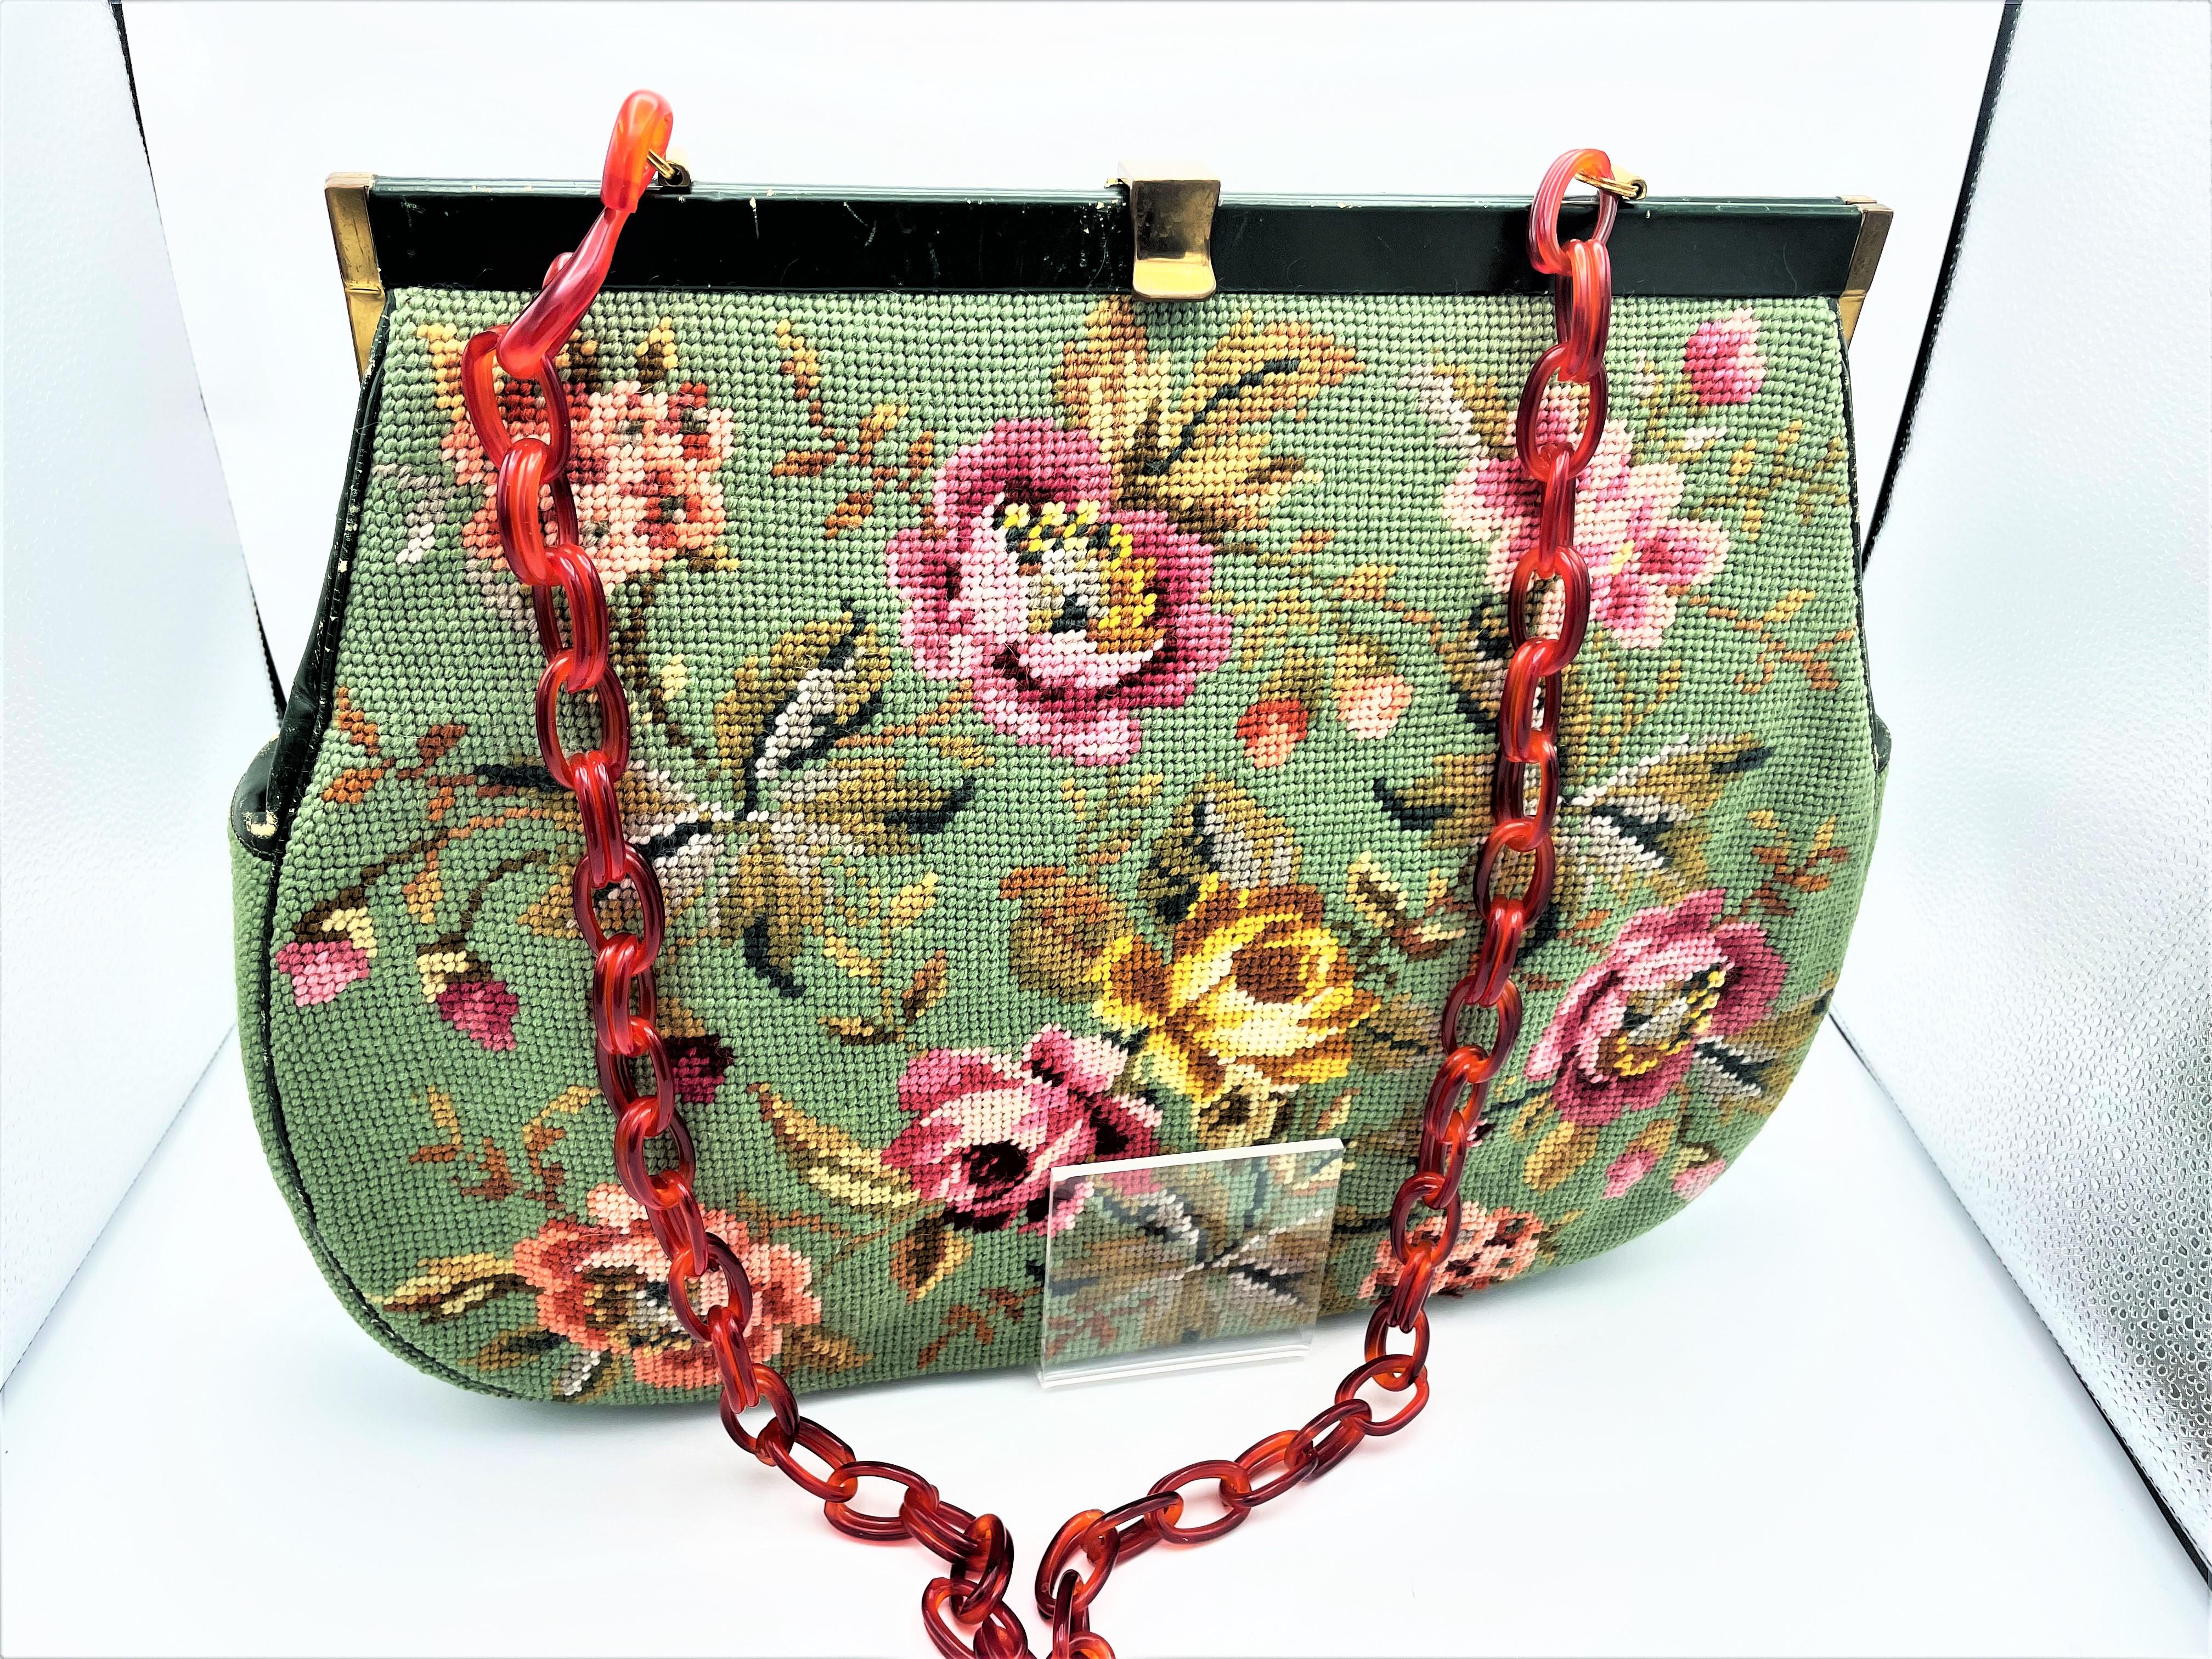 A hand embroidered bag all around. Colorful roses with buds and leaves on a light green background. Inside lined light leather with a zipper compartment and 3 other compartments. The upper opening is covered with green leather, green leather on the